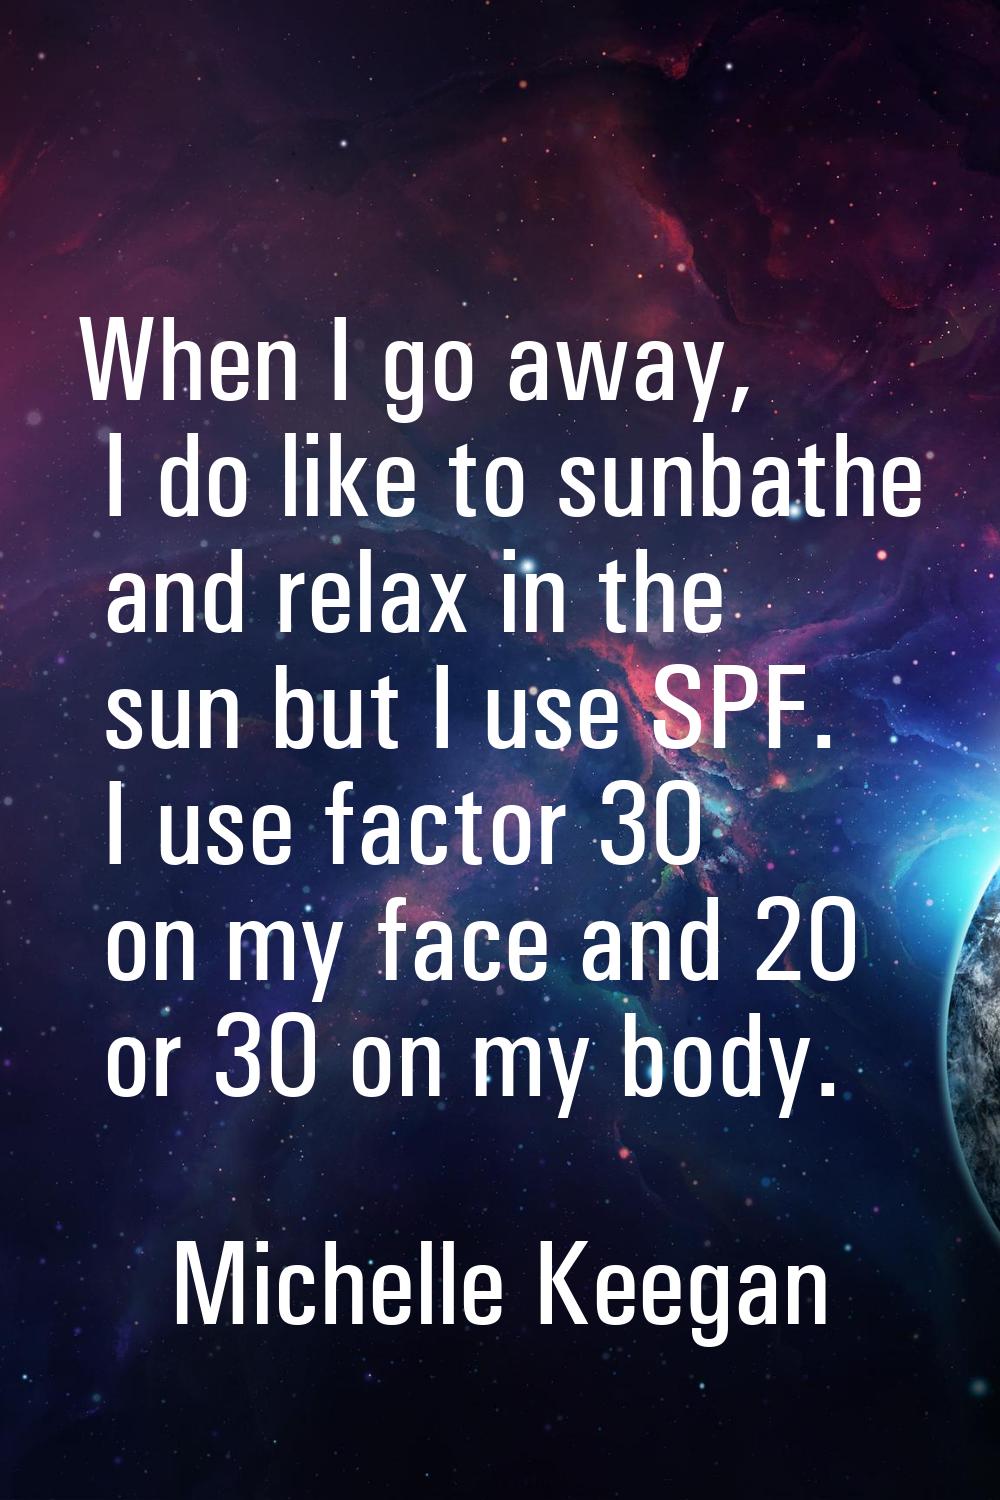 When I go away, I do like to sunbathe and relax in the sun but I use SPF. I use factor 30 on my fac